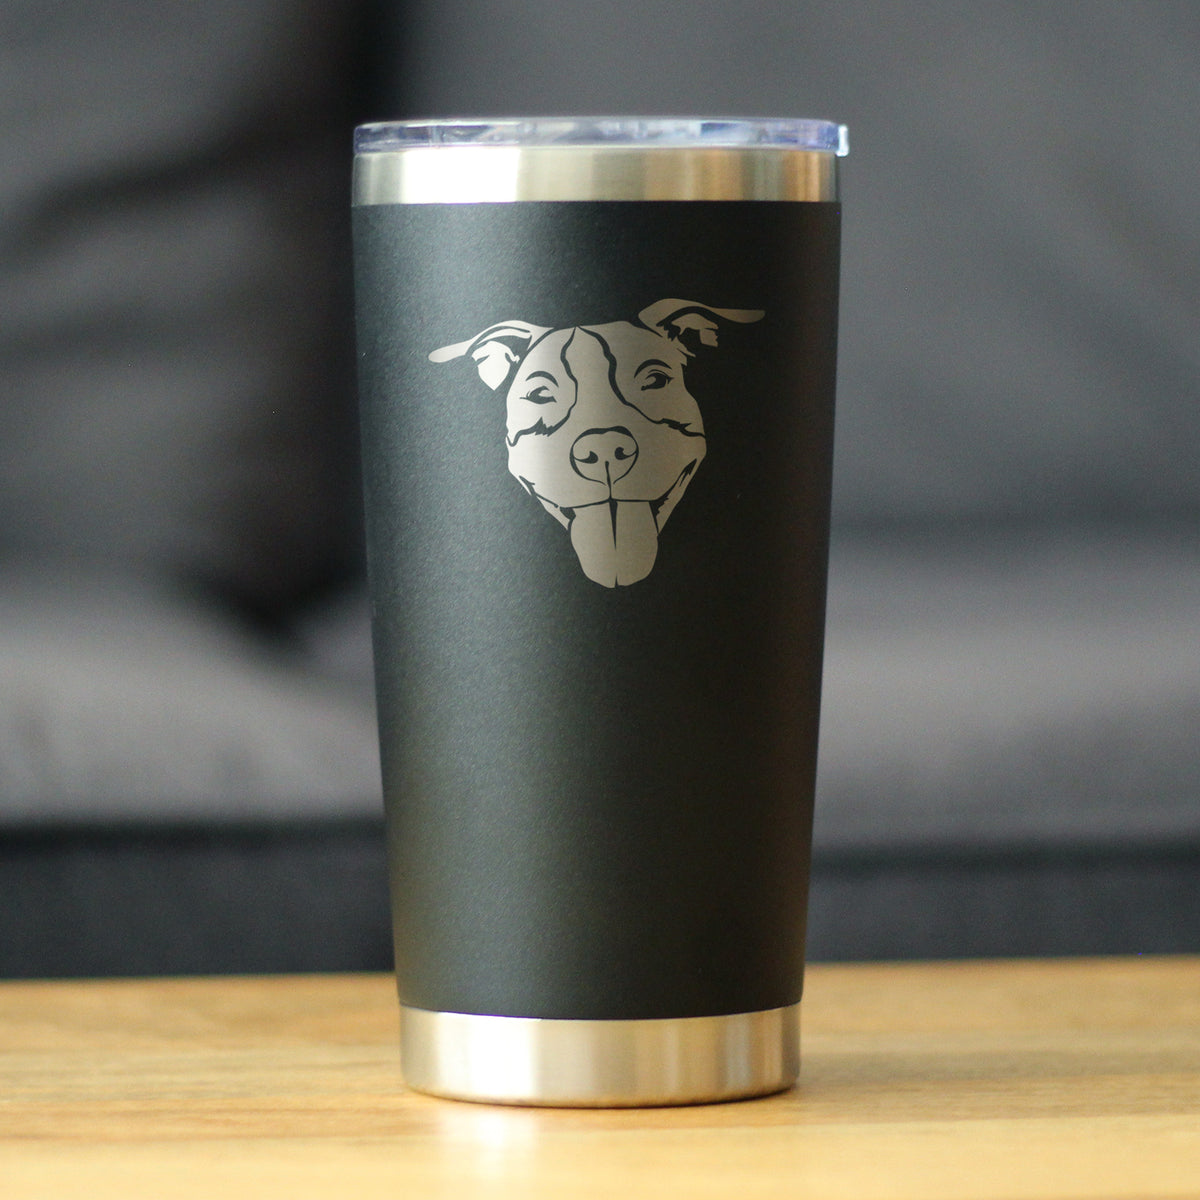 Happy Pitbull - Insulated Coffee Tumbler Cup with Sliding Lid - Stainless Steel Insulated Mug - Cute Pitbull Themed Dog Gifts and Party Decor for Women and Men